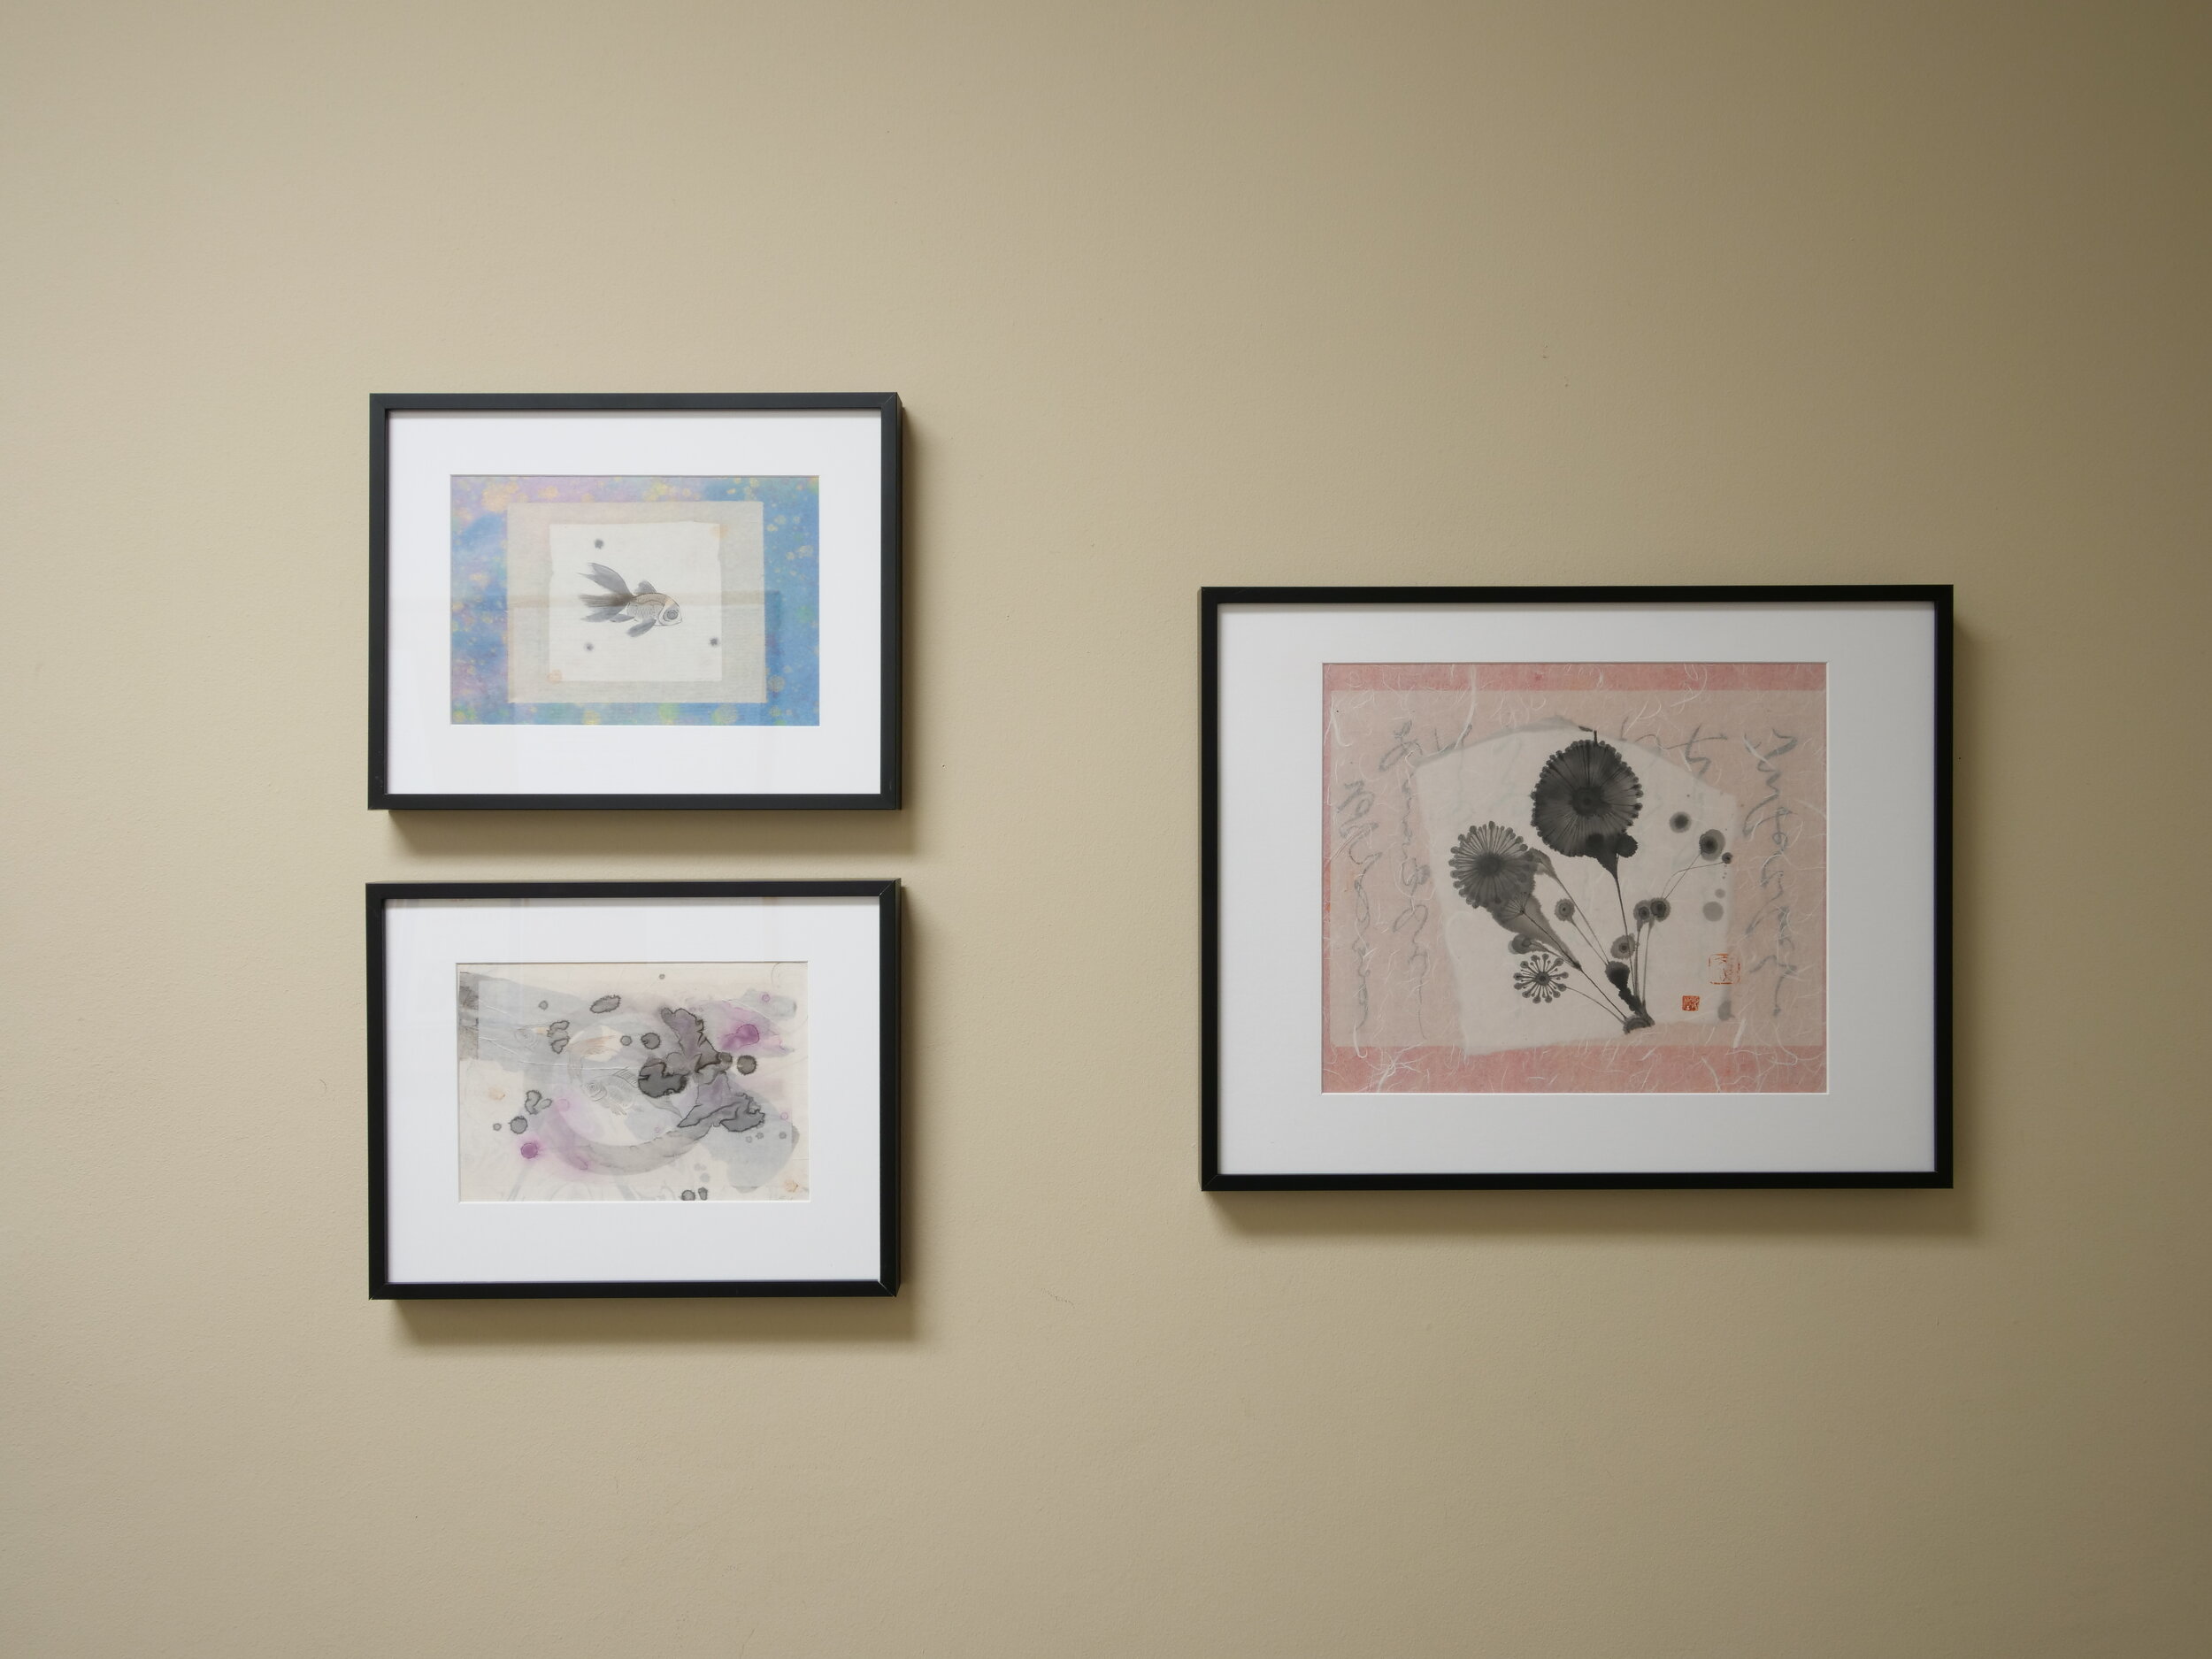 Three abstract pieces in black ink and soft colors, all displayed in black frames with white matting.